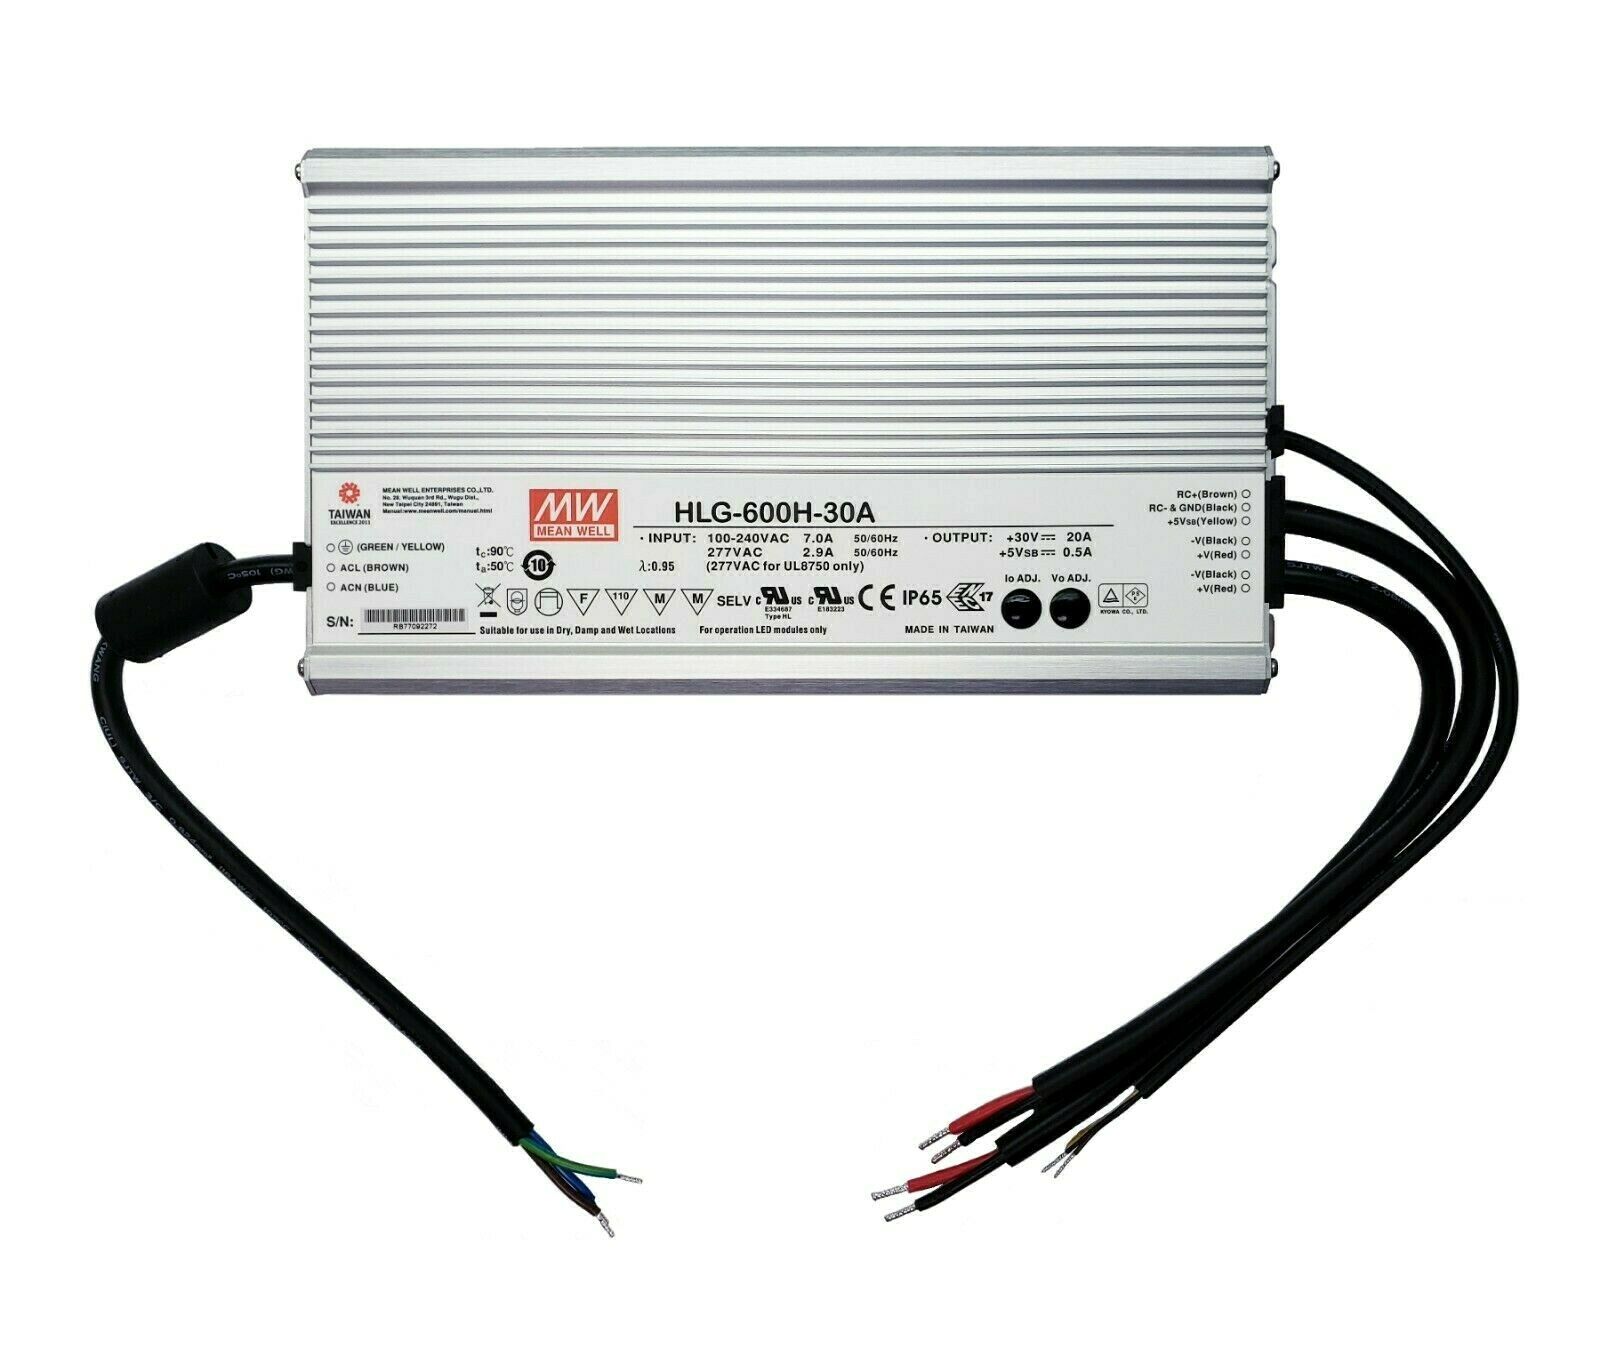 New Hlg-600h-30a Mean Well Led Driver 100-240vac In / 30v @ 20a Out Power Supply